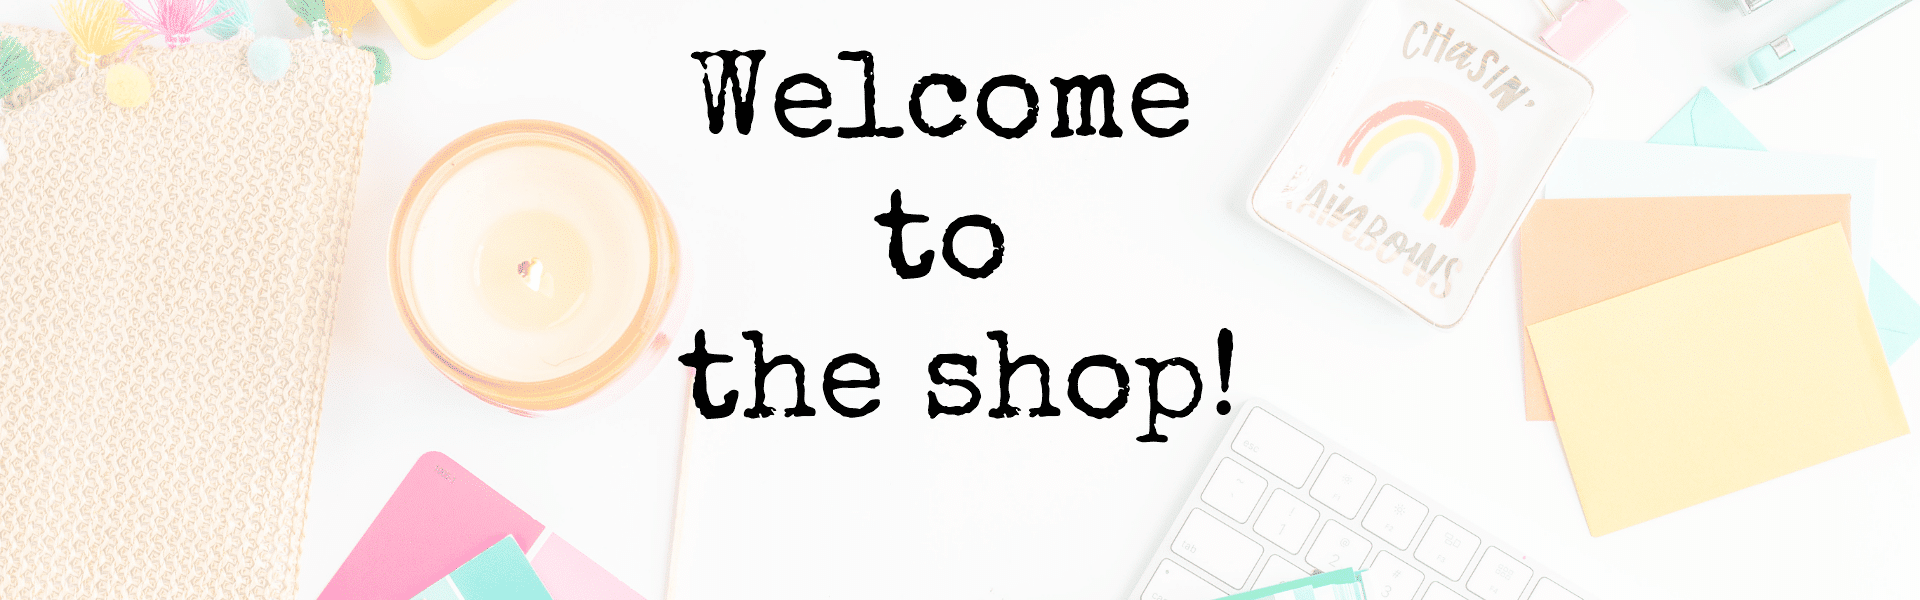 Welcome to the shop! (1)